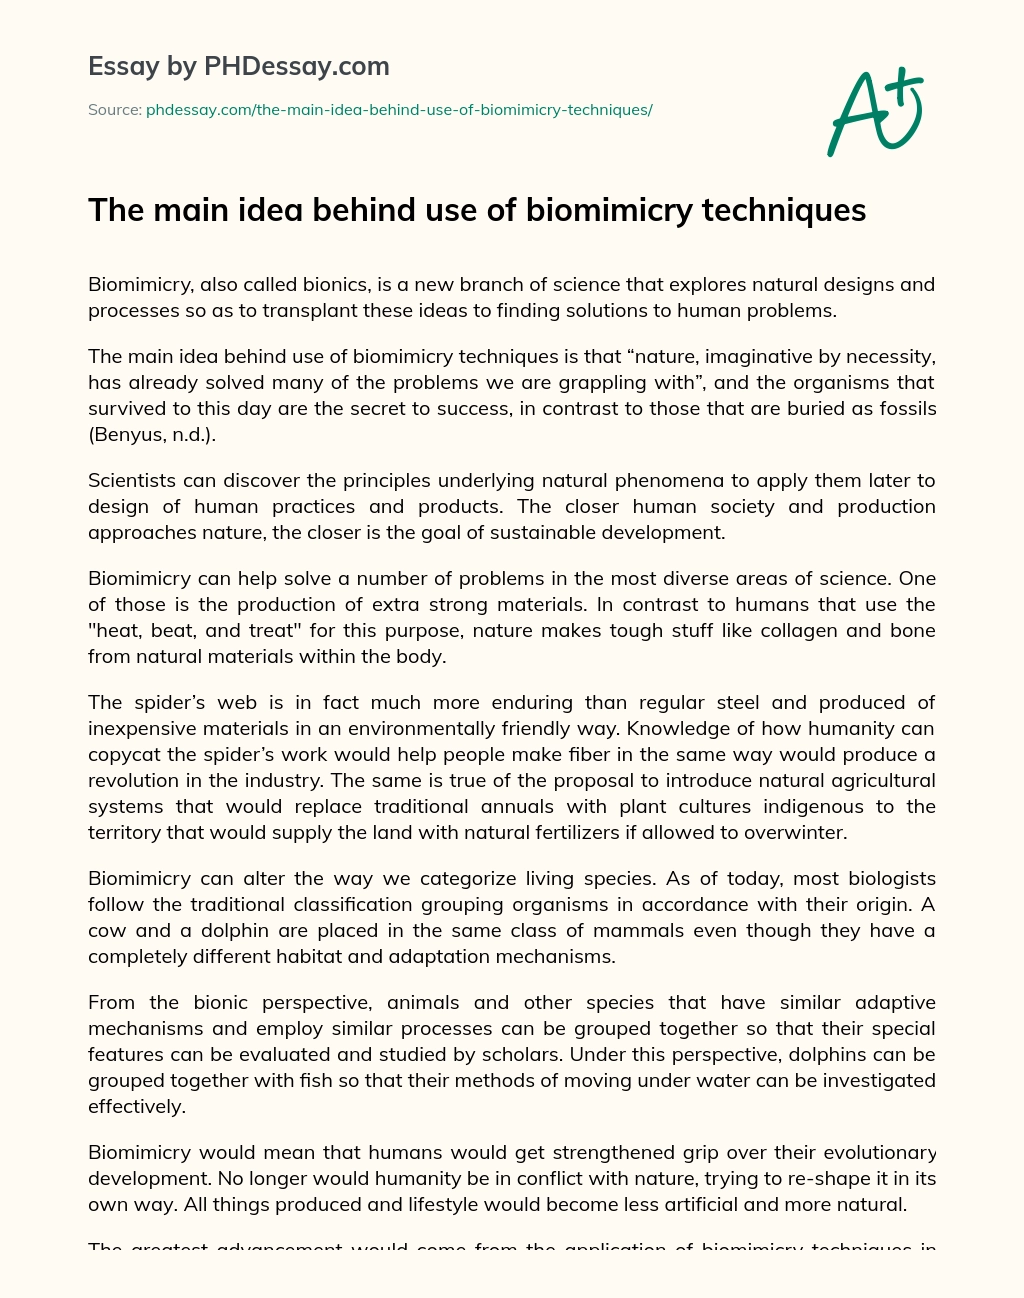 The main idea behind use of biomimicry techniques essay